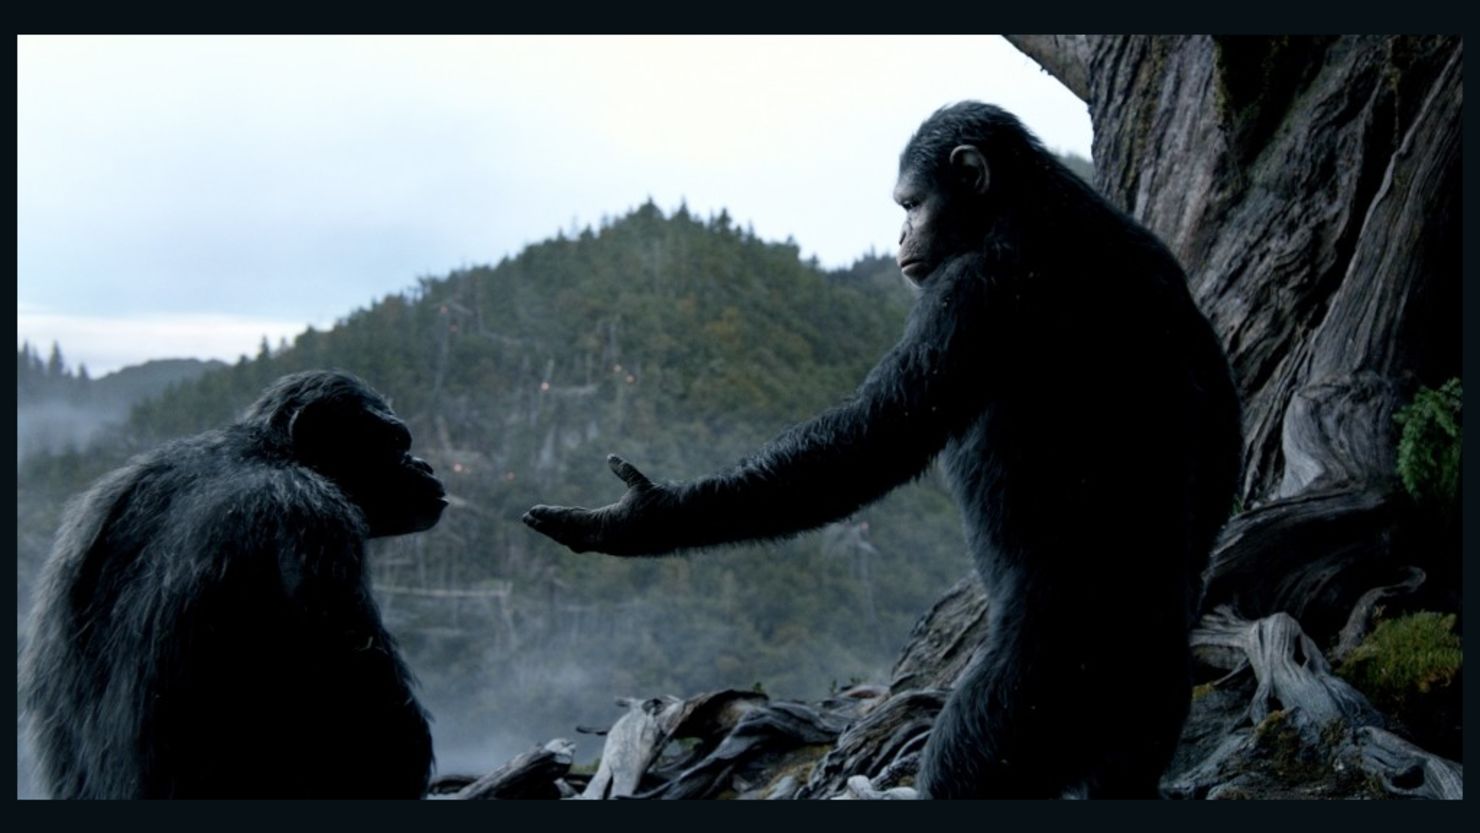 Andy Serkis brings life to simian Caesar (right) in 20th Century Fox's "Dawn of the Planet of the Apes."